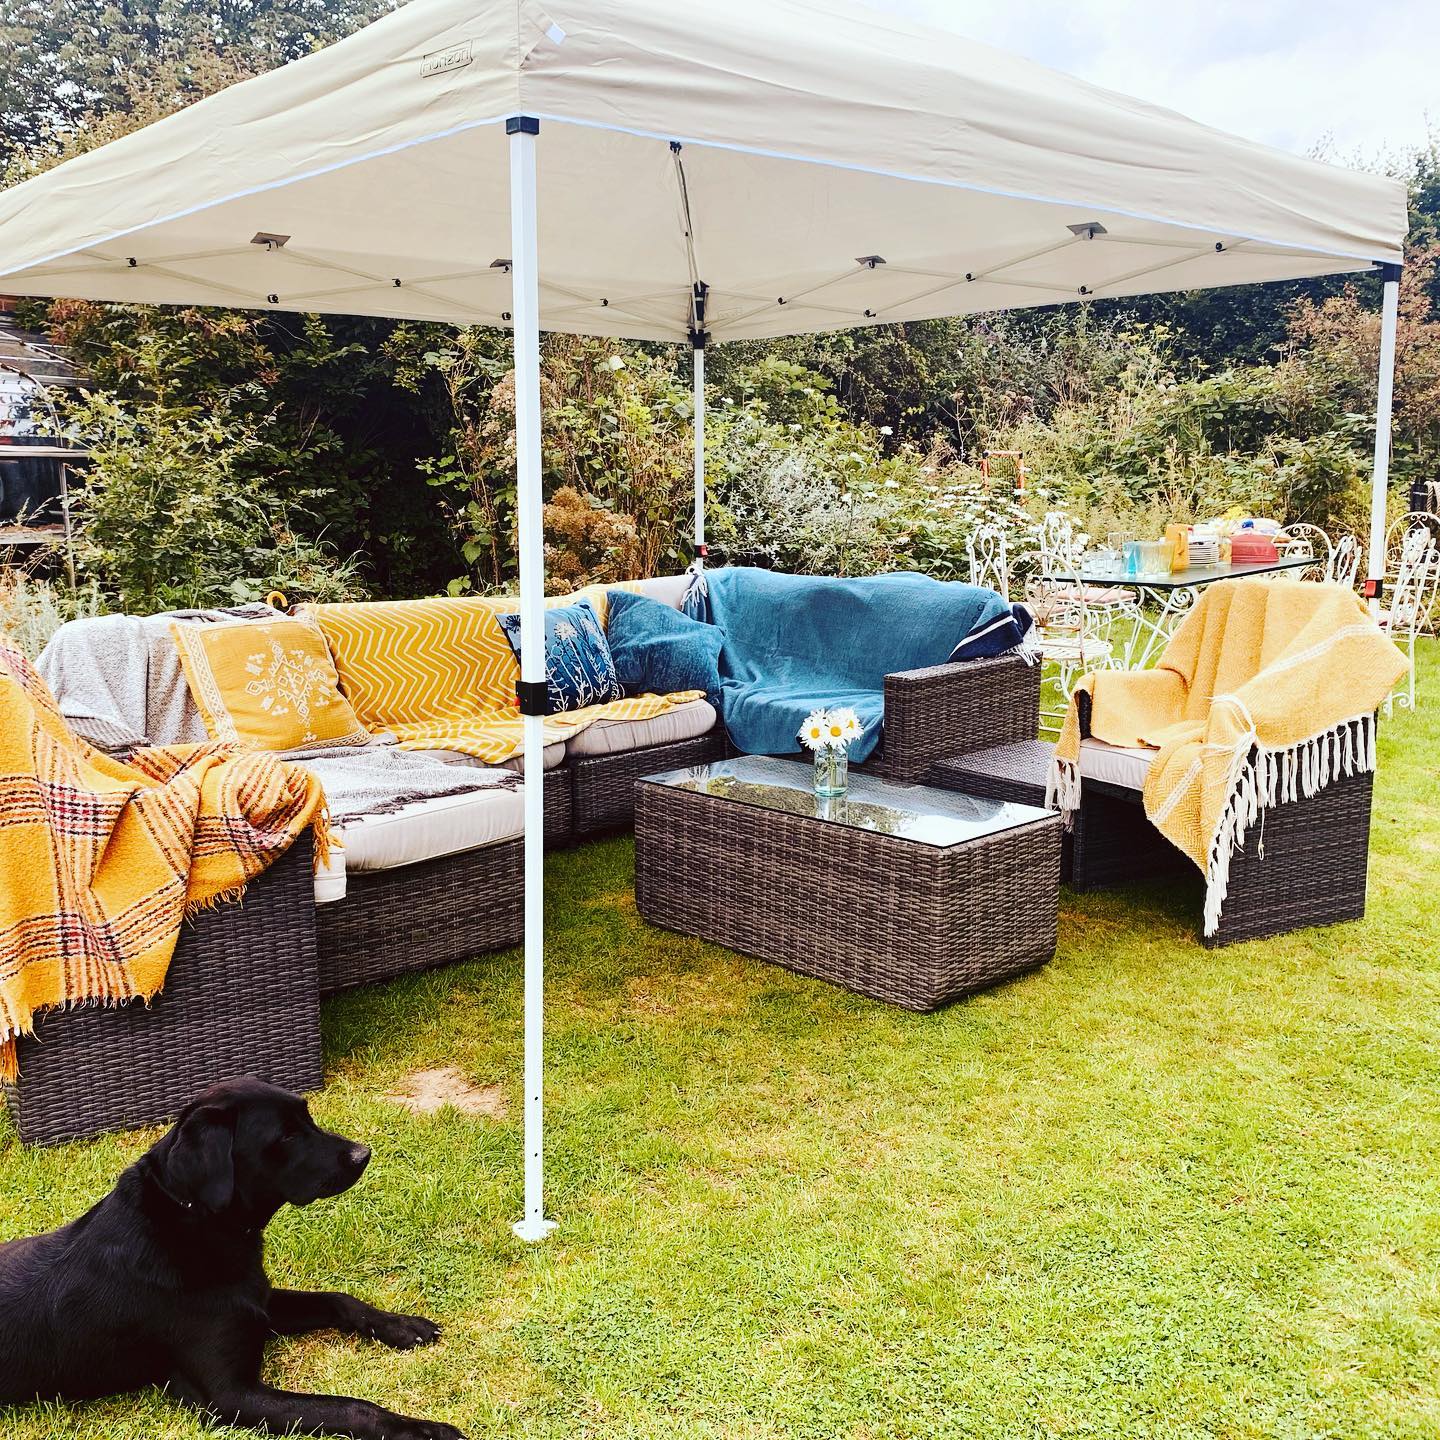 A sectional patio couch covered in blankets beneath a backyard canopy tent, with a black Labrador Retriever sitting beside it. Photo by Instagram user @htmg_heminsleytaylormade